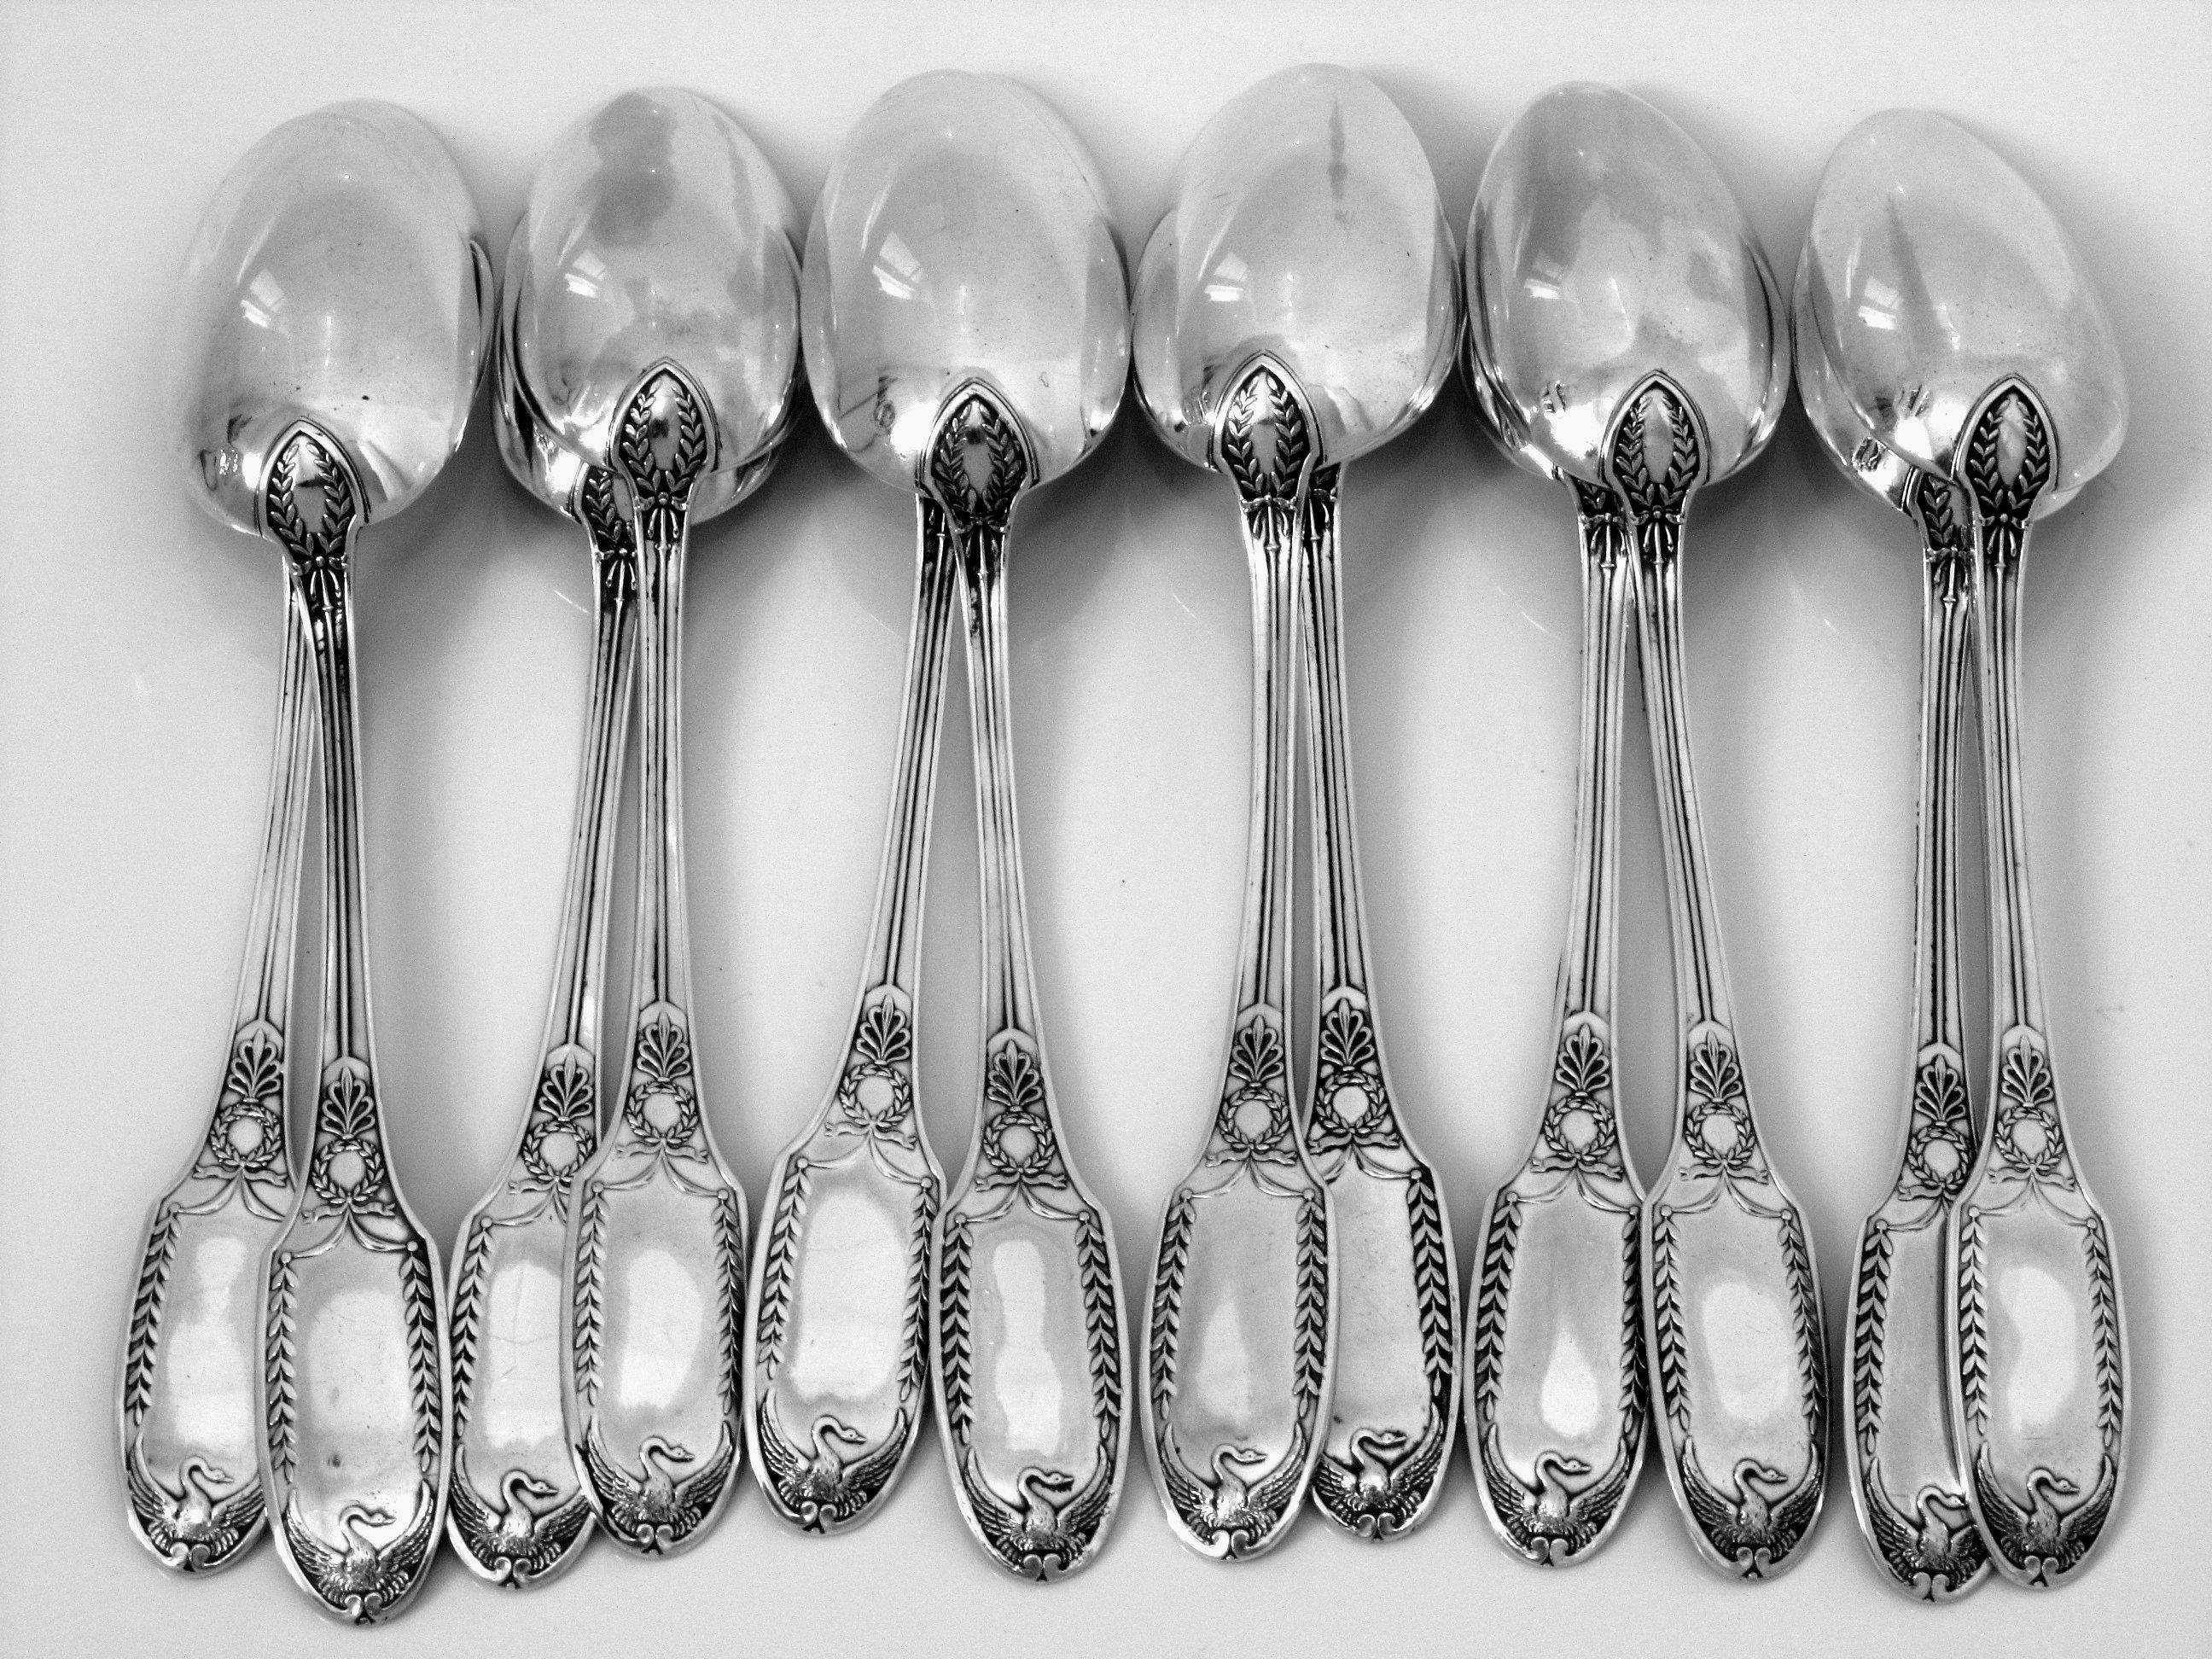 Puiforcat Rare French Sterling Silver Tea or Coffee Spoons Set 12 pc box Swans 2